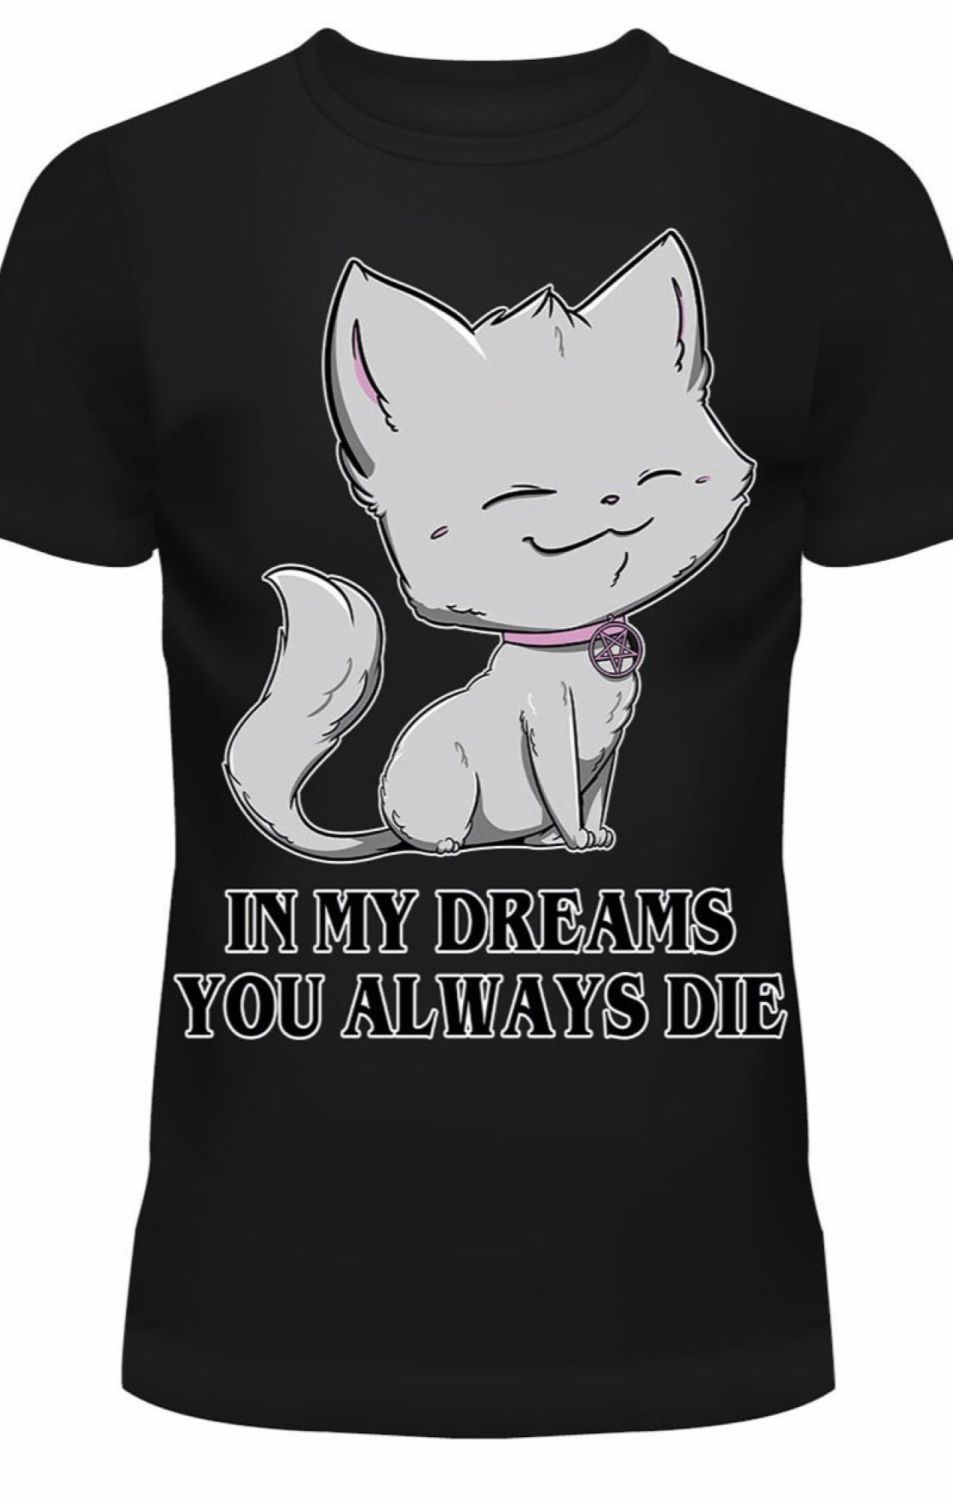 In my dreams t-shirt by Cupcake cult